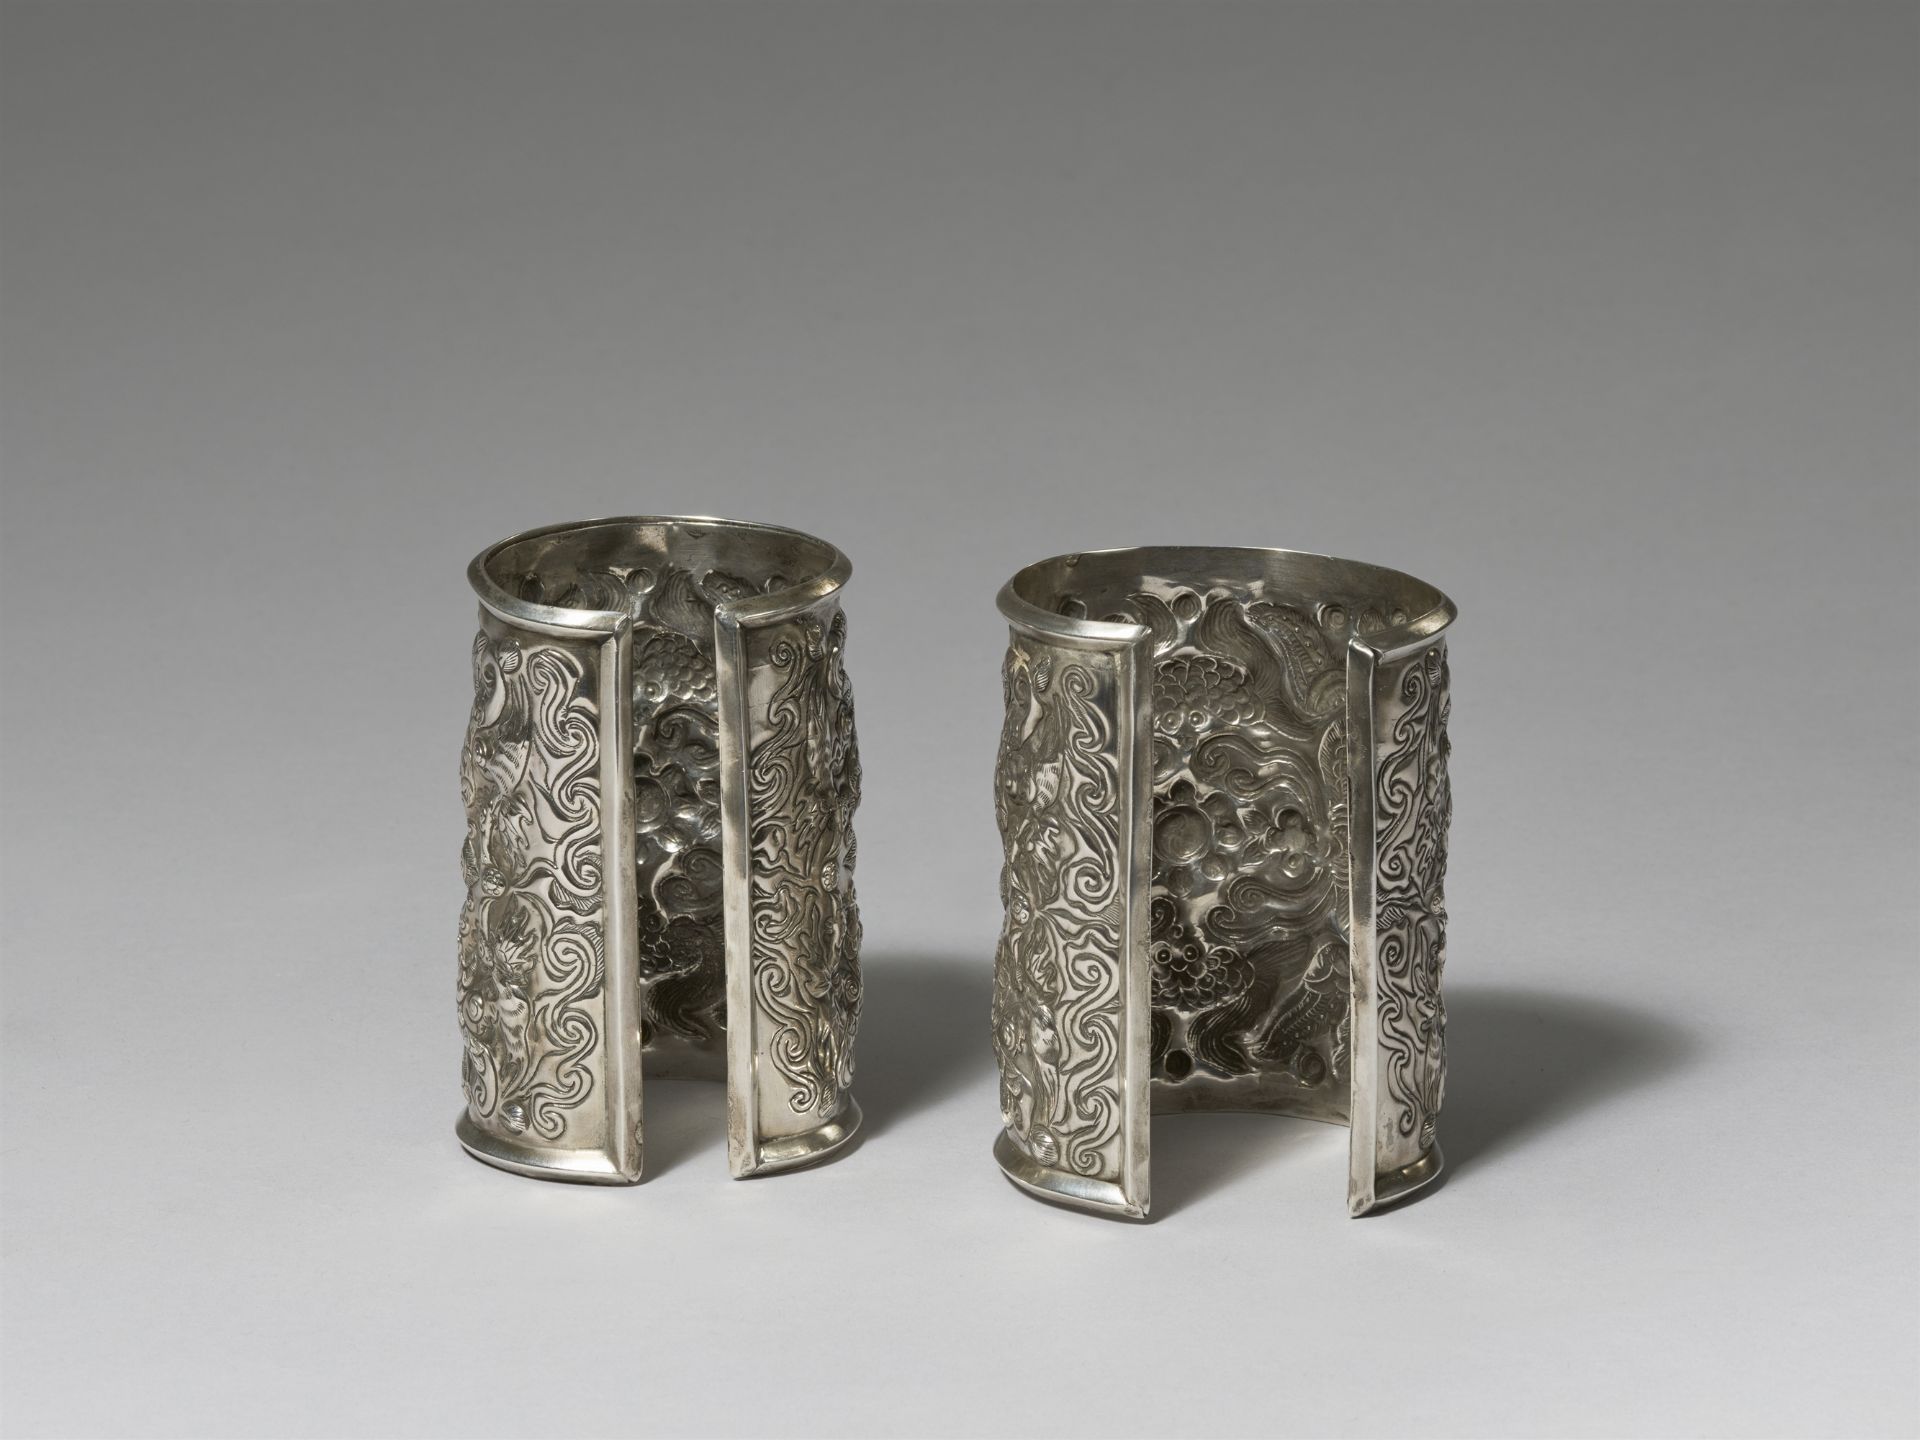 A pair of silver bracelets for women. Southwestern China, Guizhou province. Miao tribe. 1950s/60s - Image 2 of 2